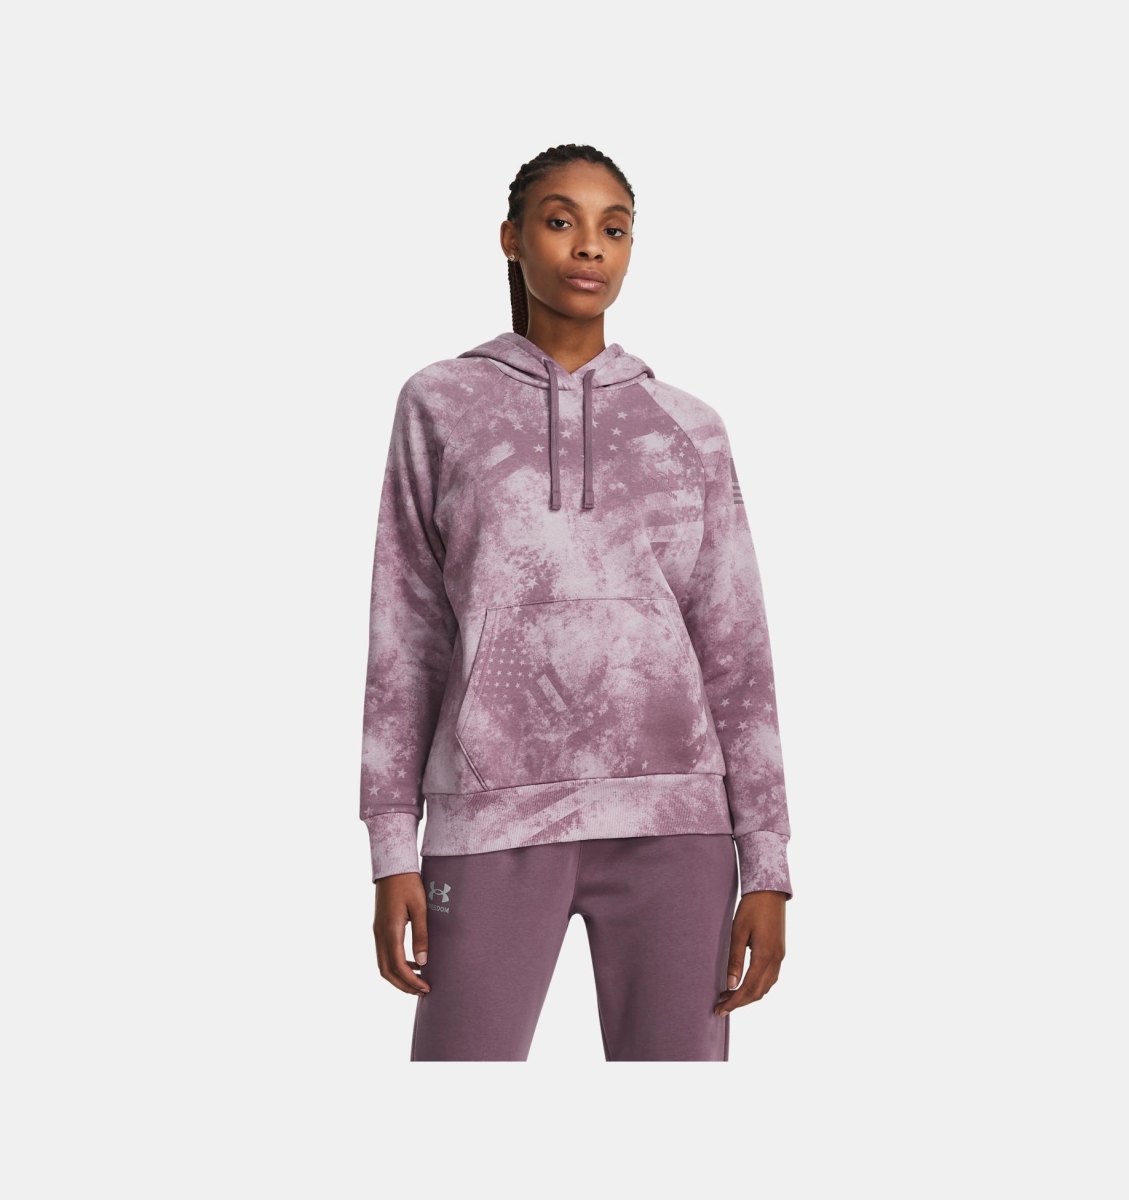 Under Armour 1379625500LG Women Freedom Rival Amp Hoodie, Misty Purple - Large -  Inner Armour